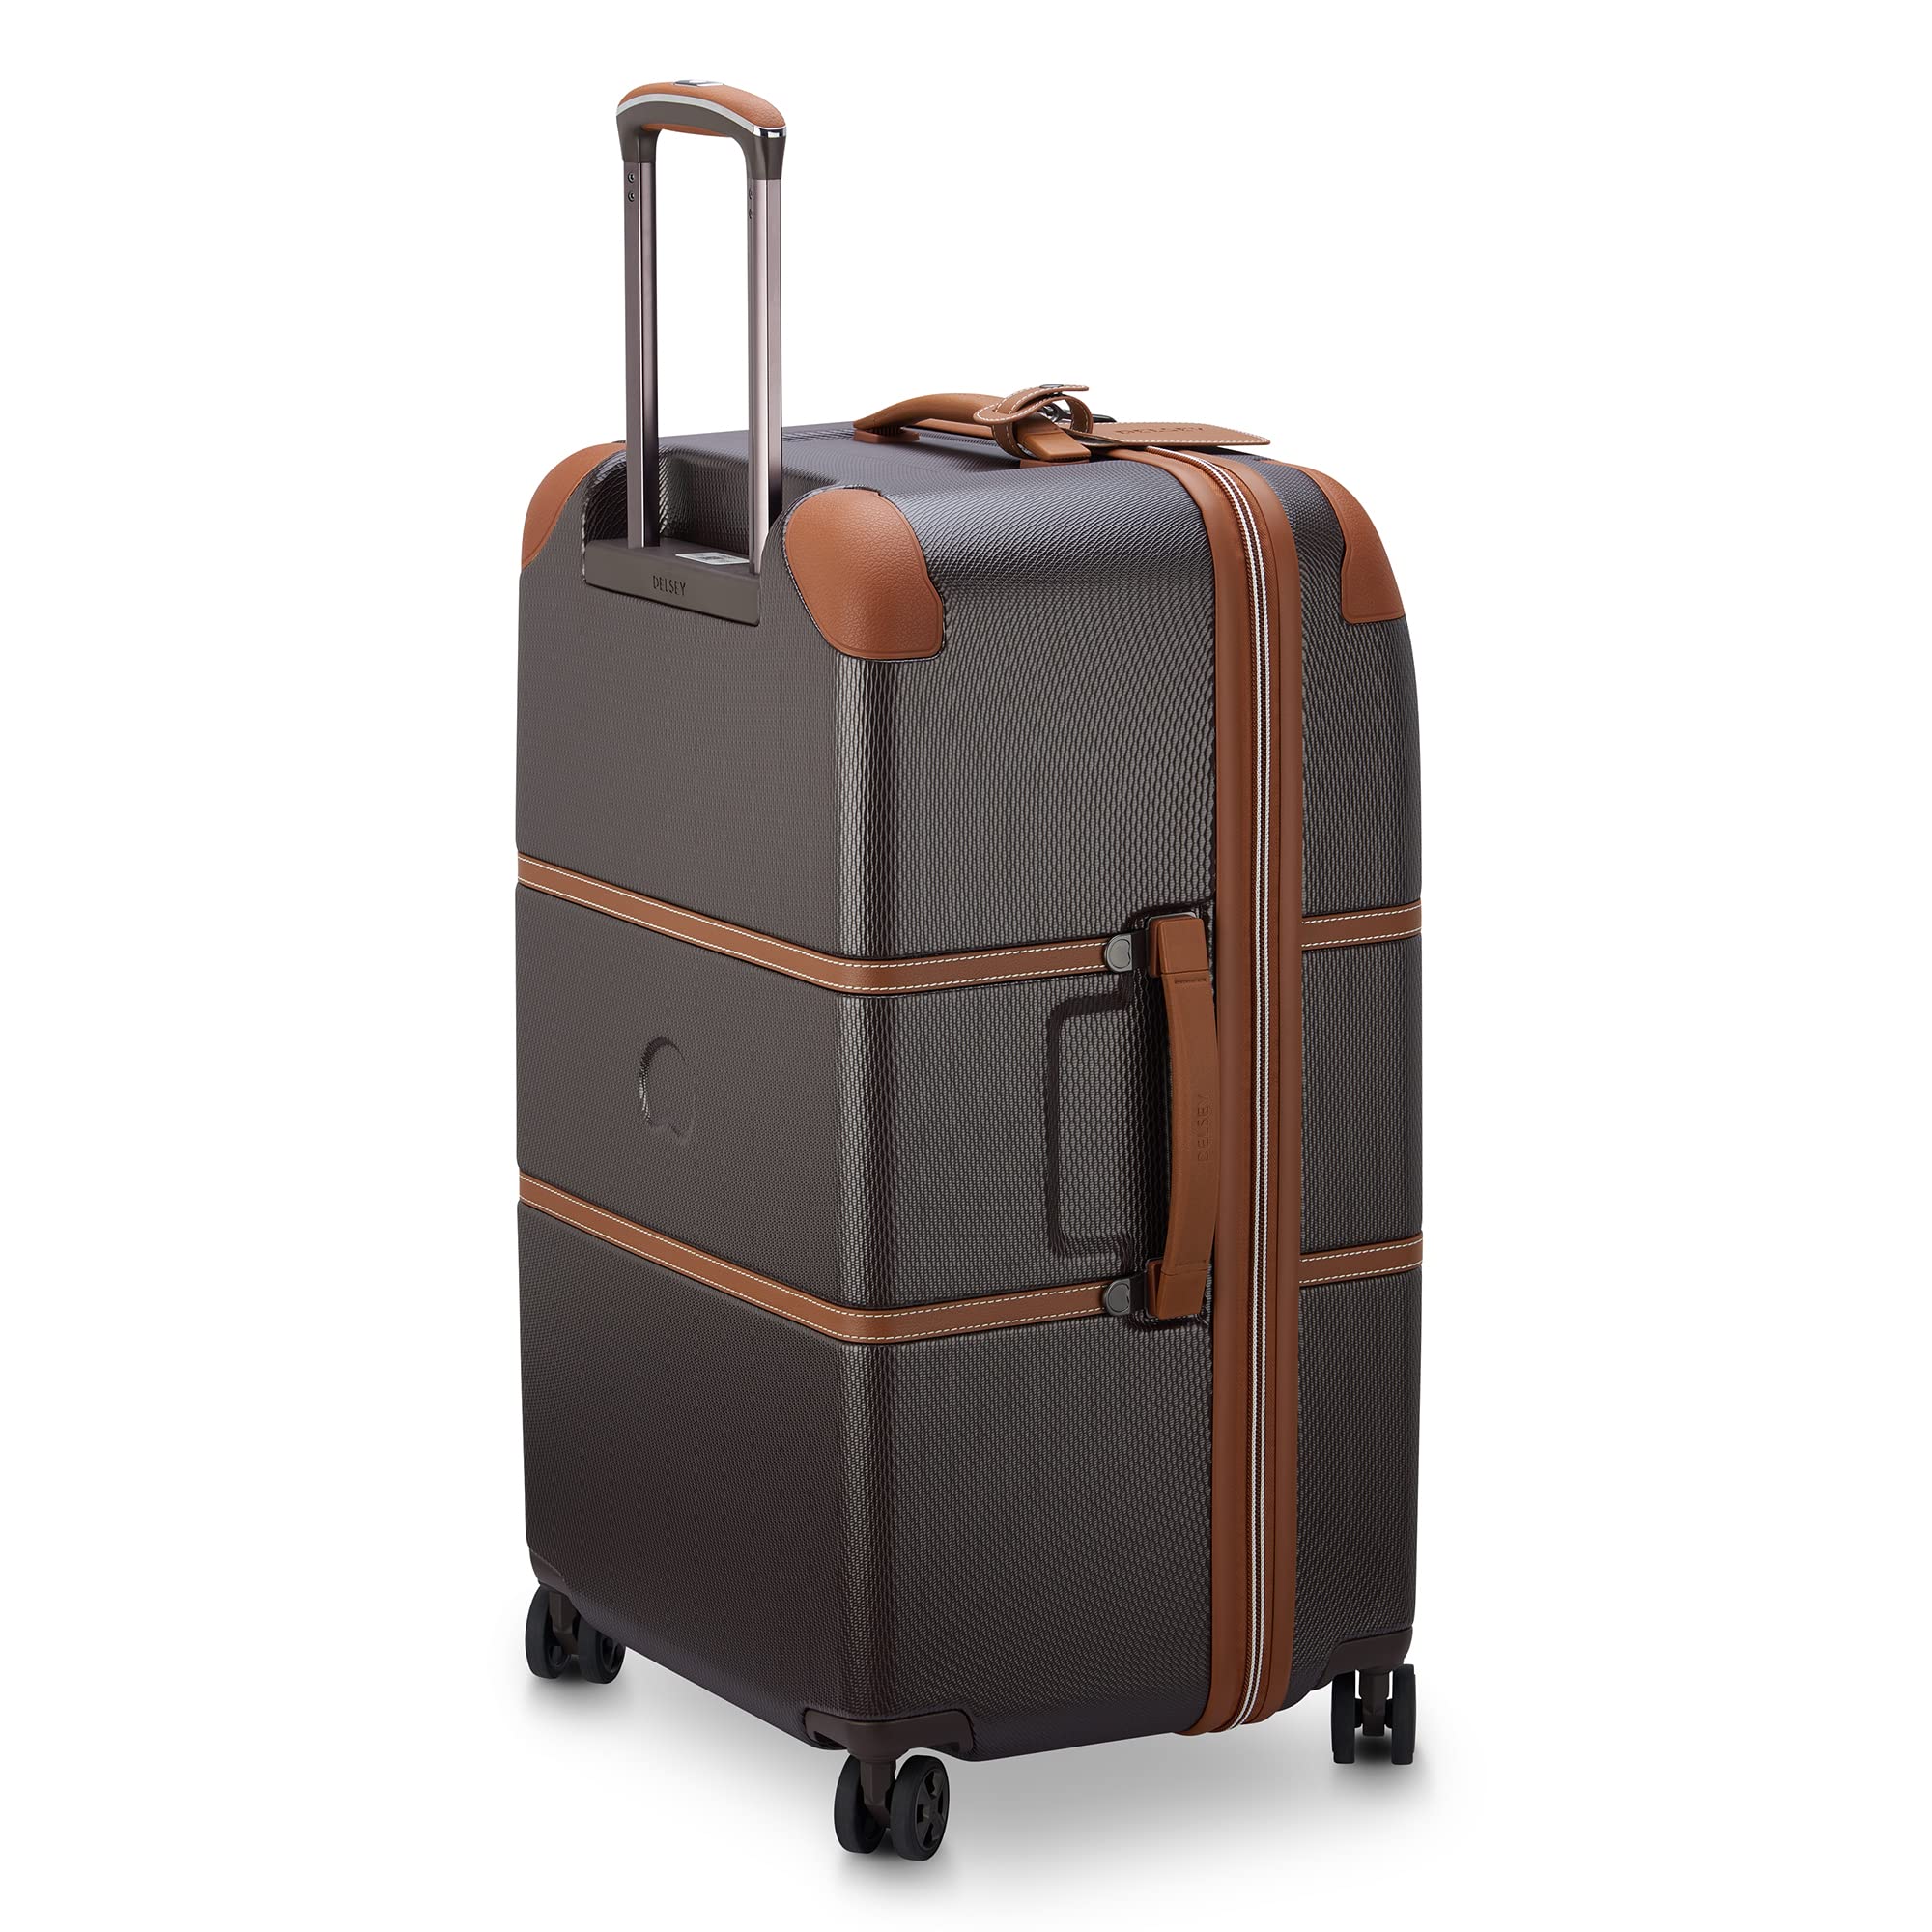 DELSEY Paris Chatelet Hardside 2.0 Luggage with Spinner Wheels, Chocolate Brown, Checked-26 Inch Trunk